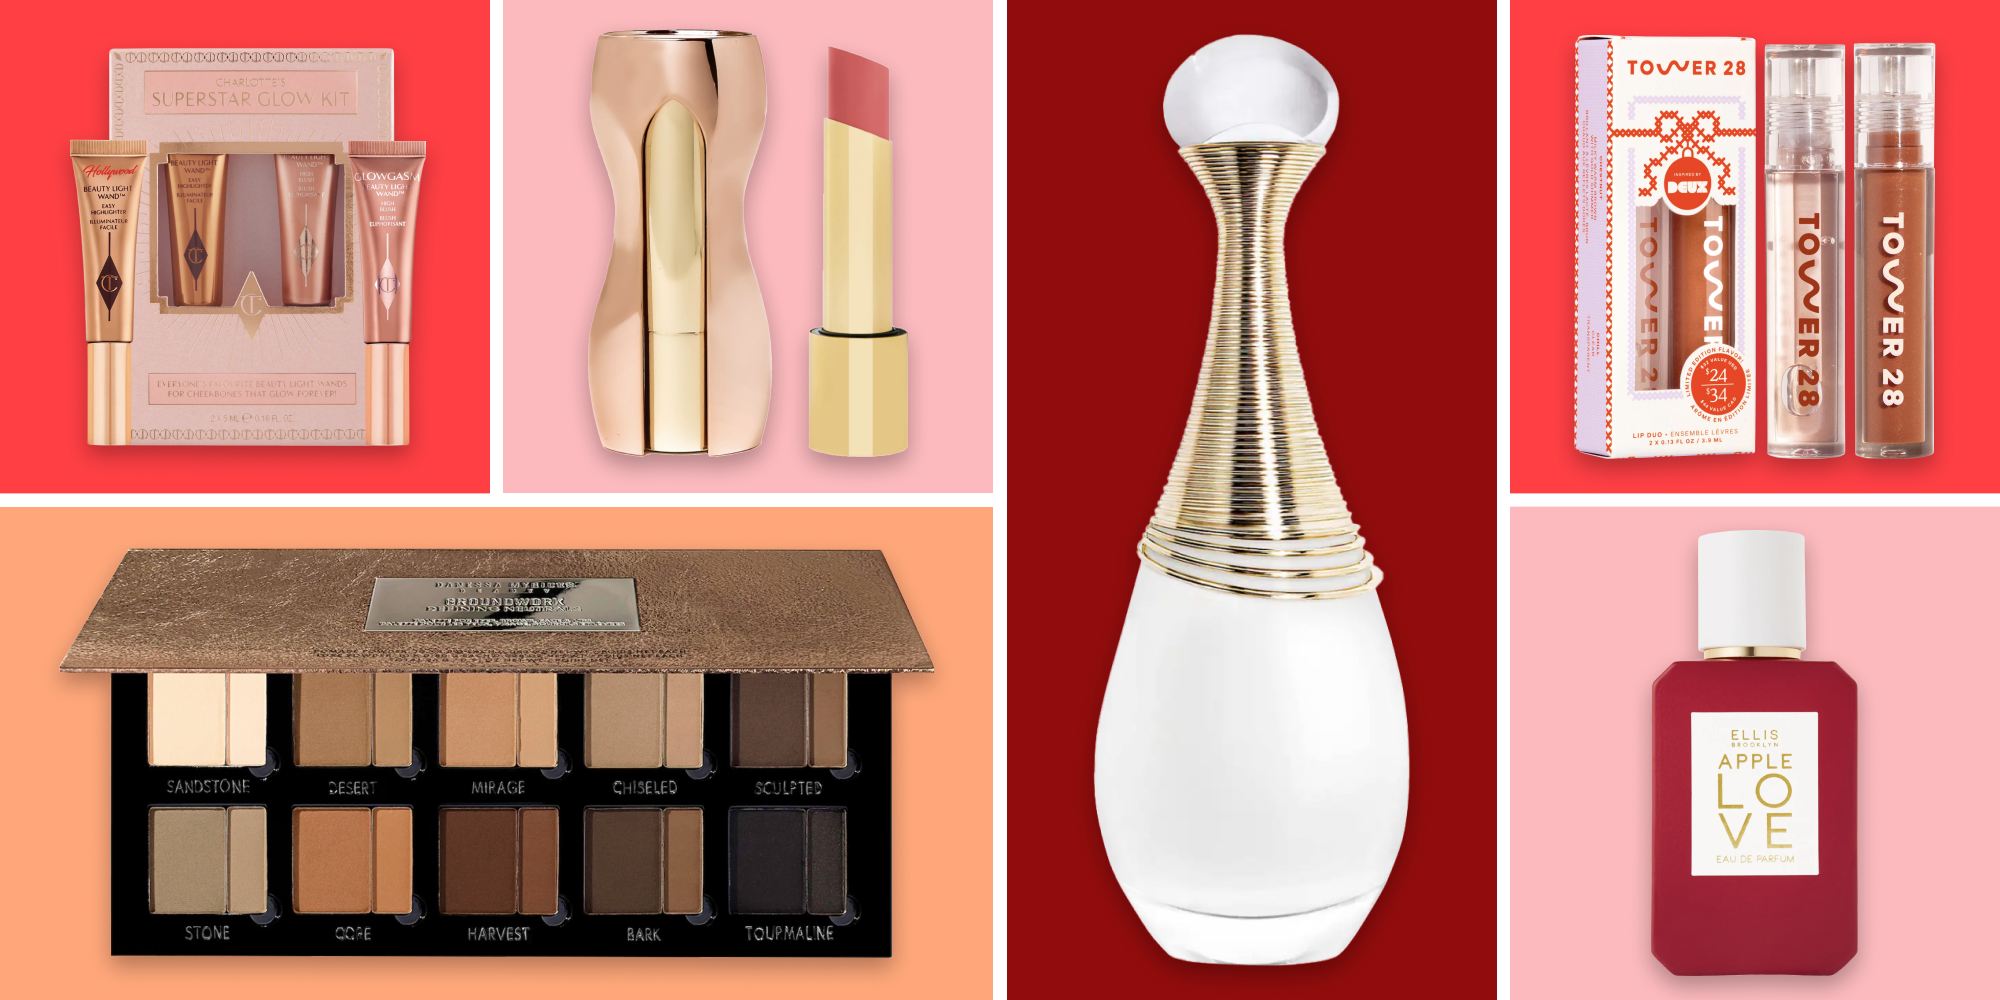 15 Makeup and Beauty Gift Ideas: Hair Gadgets, Skincare, and More